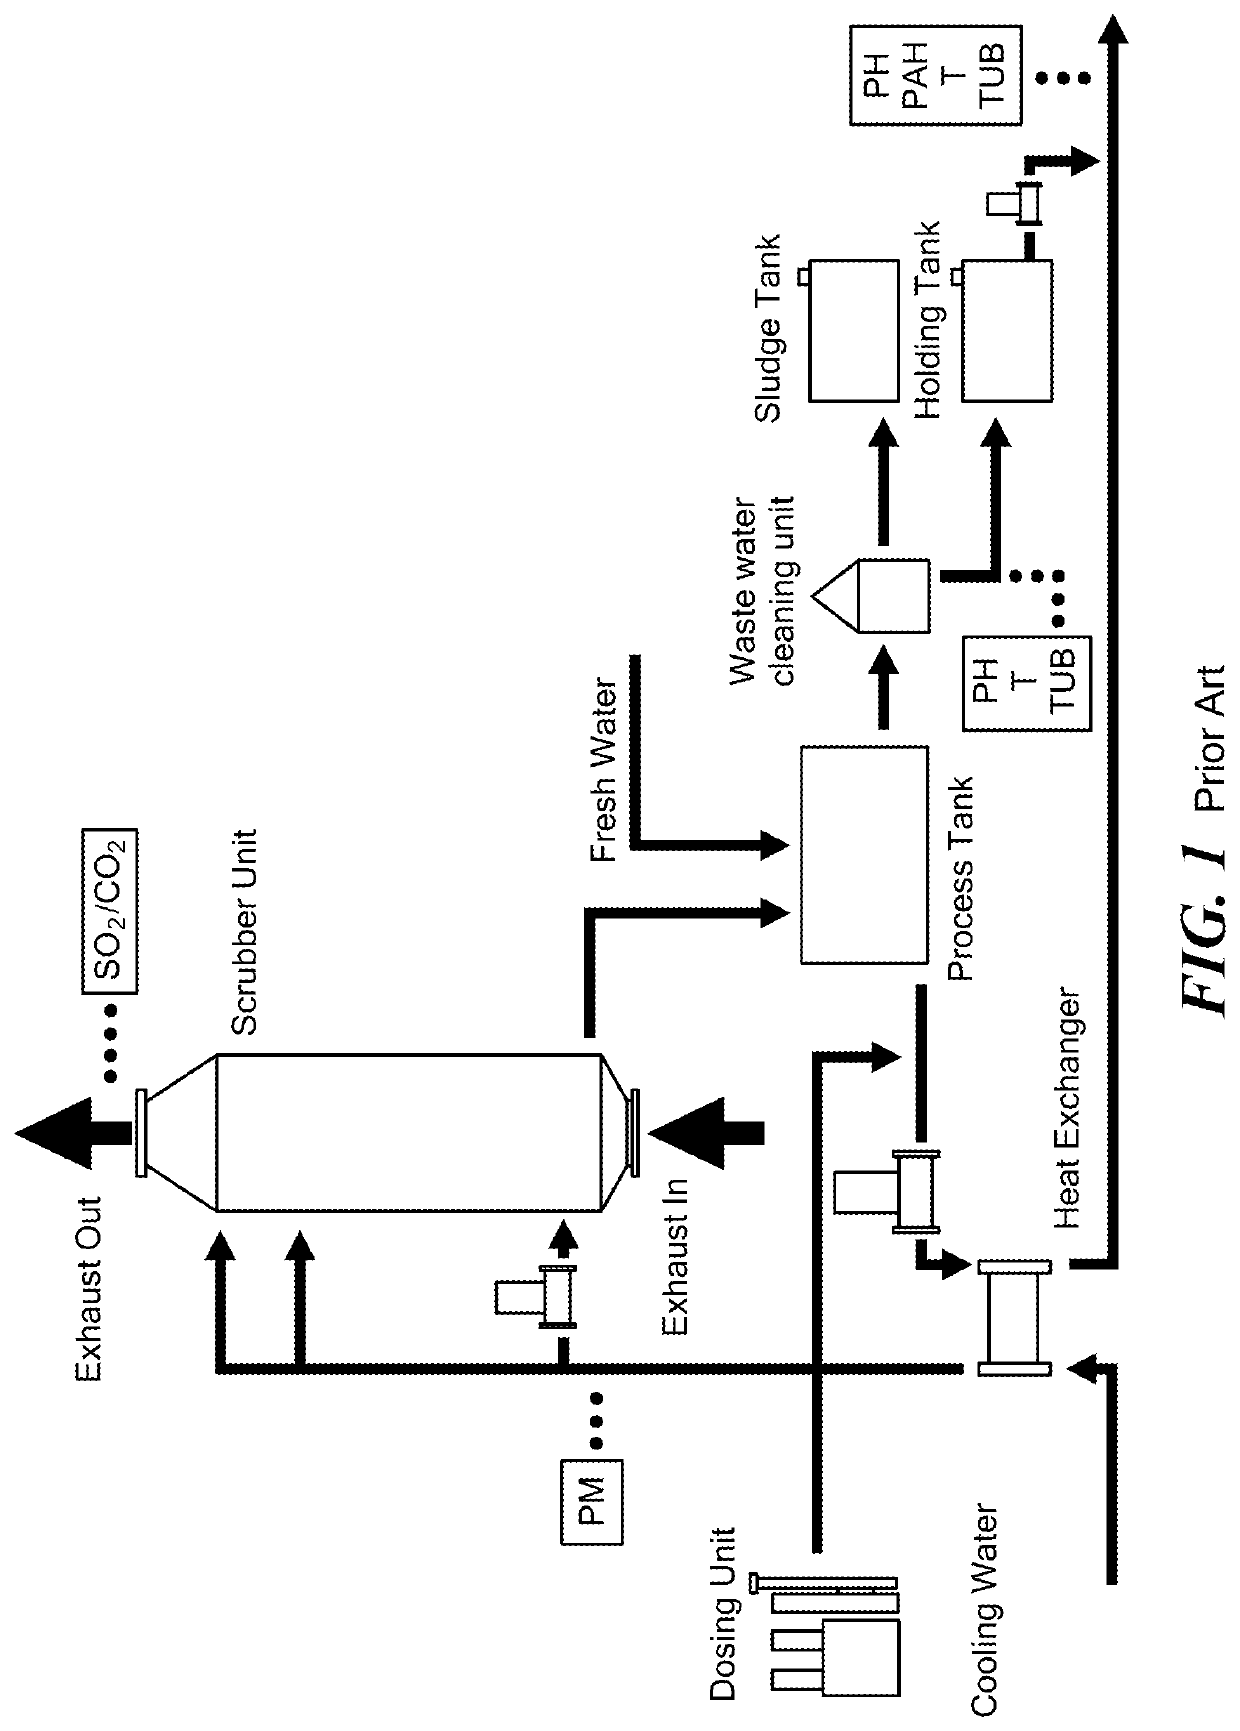 Reactive cyclic induction system and method for reducing pollutants in marine diesel exhaust